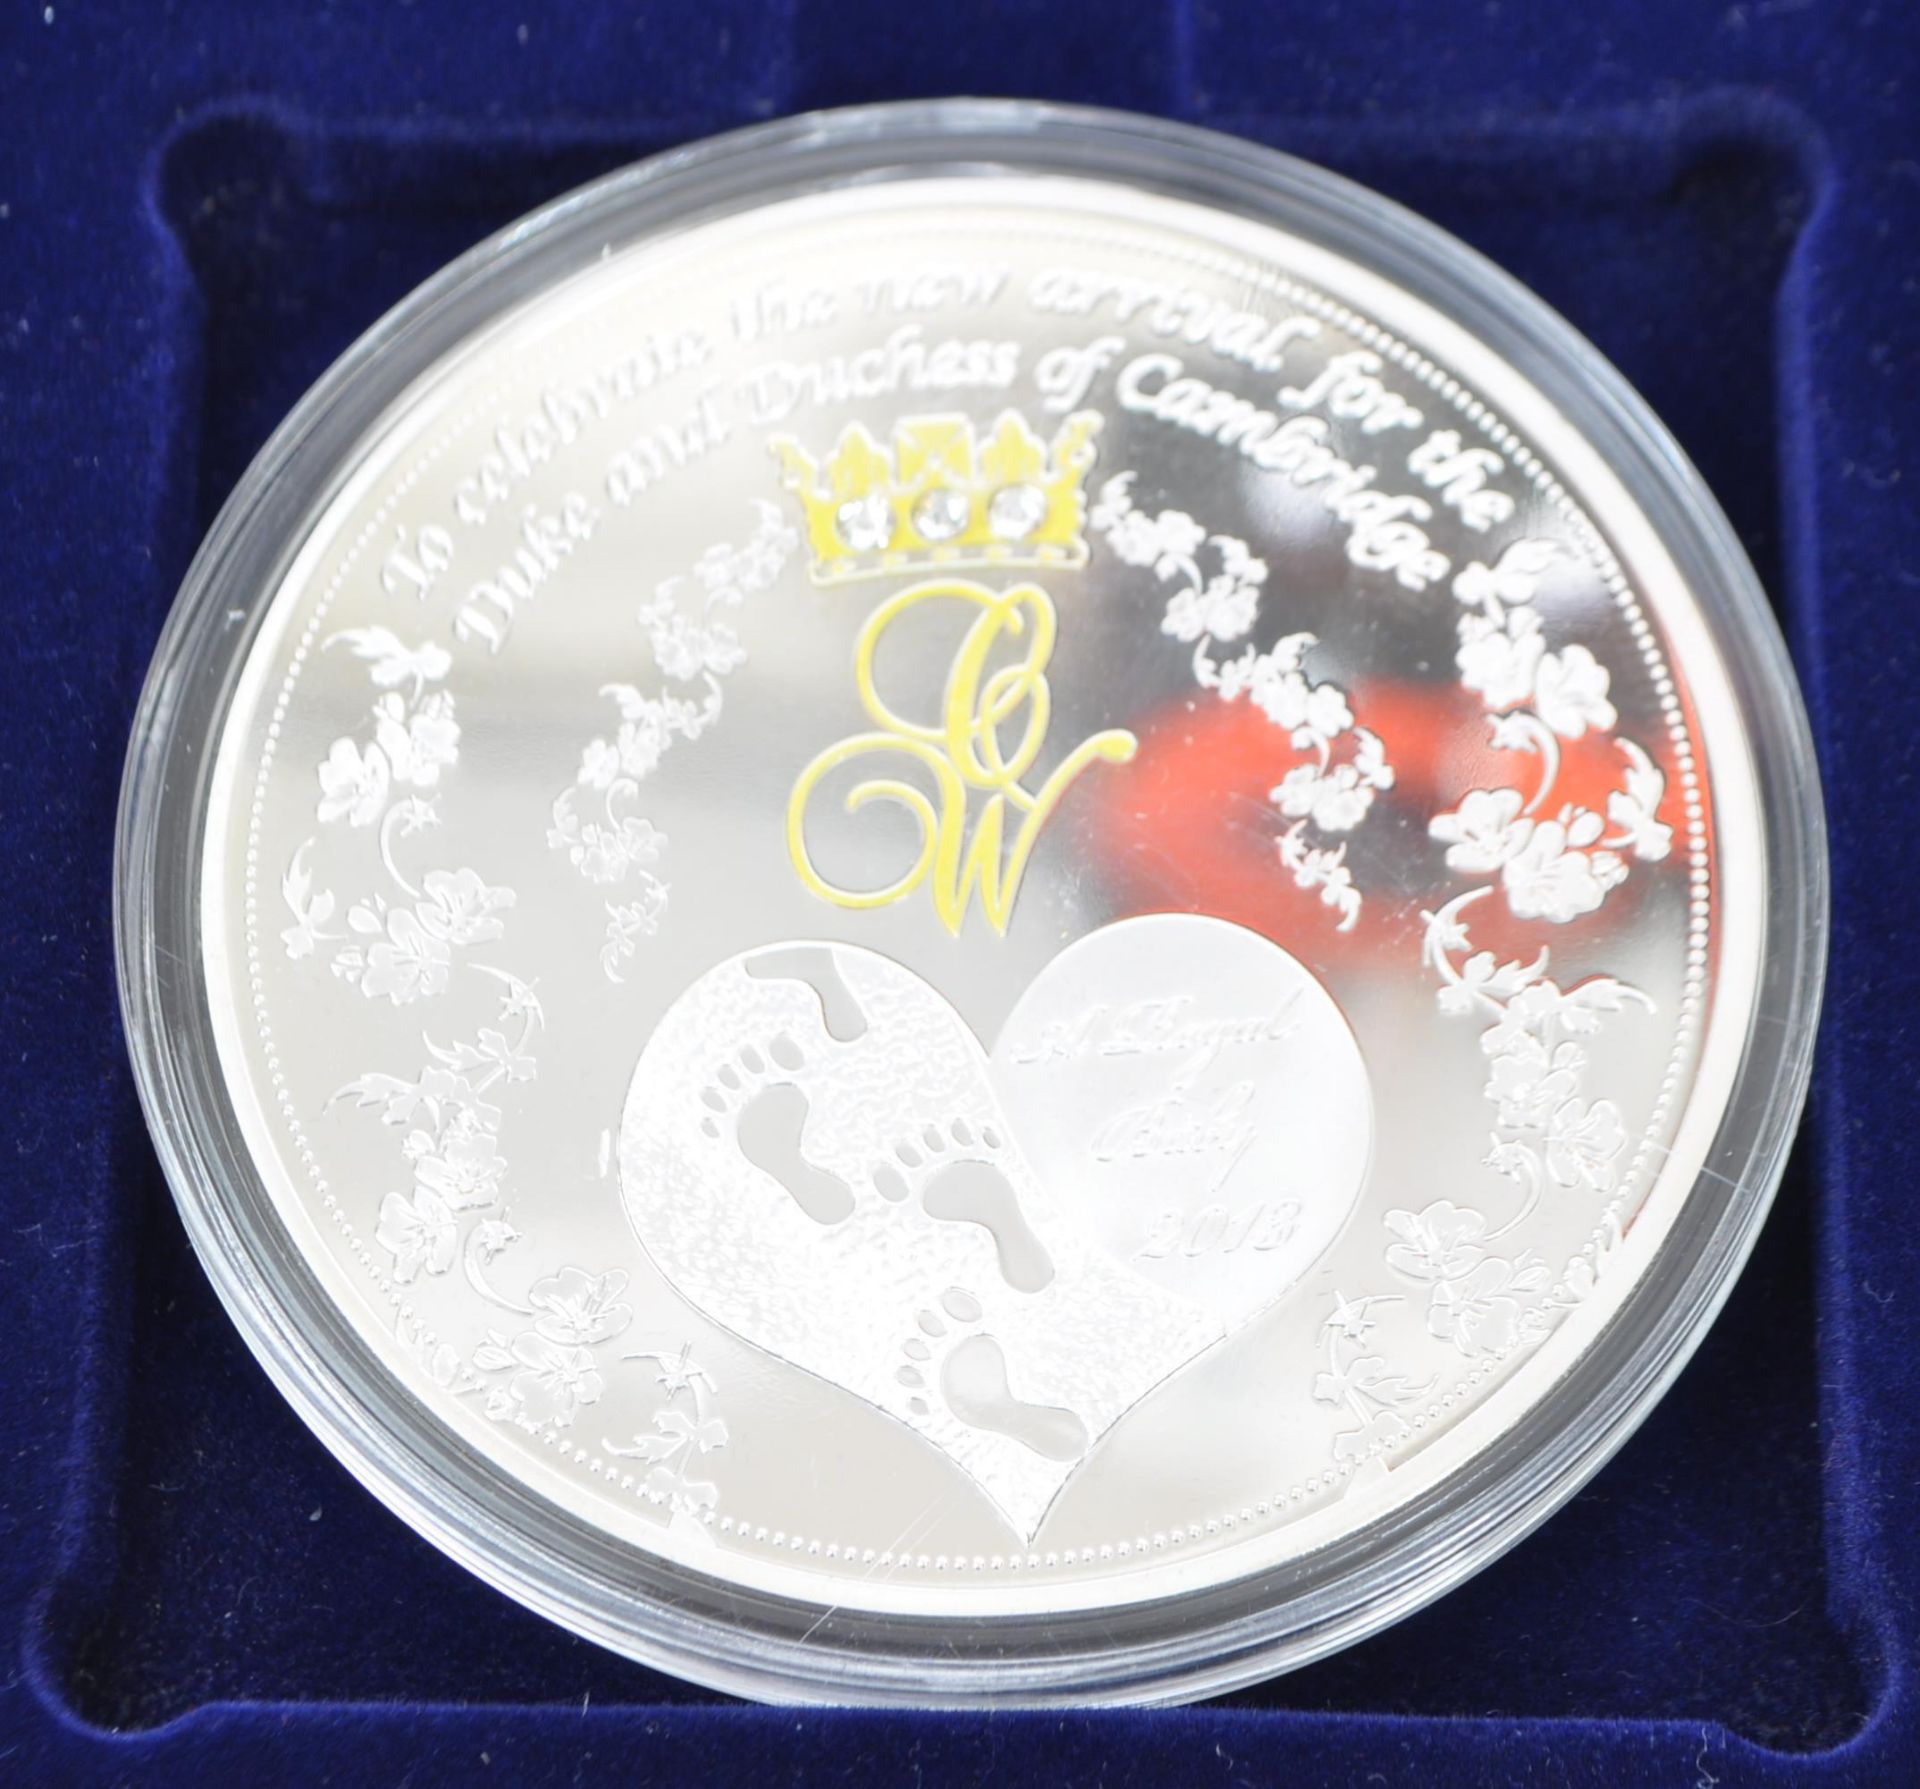 2012 / 13 UK BRILLIANT CONCORDE / ROYAL FAMILY COIN SET - Image 4 of 10